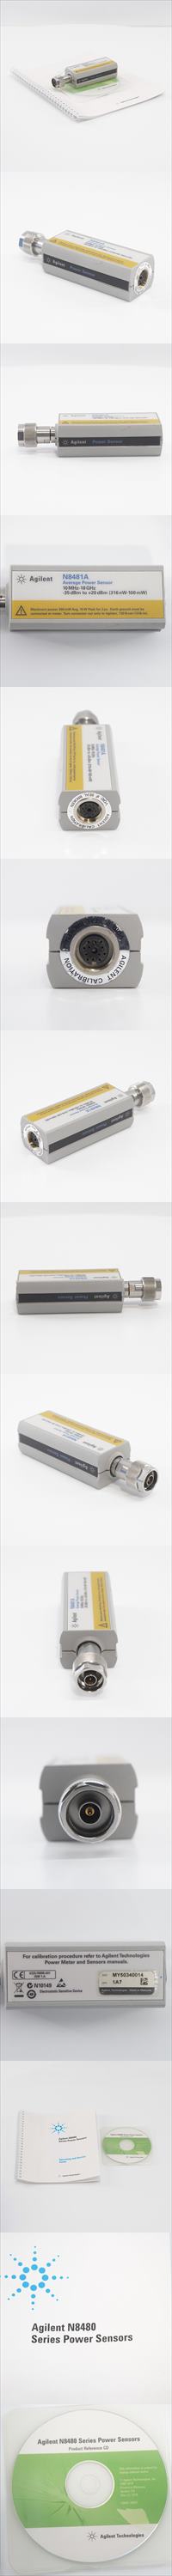 10%OFF[DW]USED 8日保証 Agilent N8481A Average Power Sensor パワーセンサー OPT 1A7 10MHz-18GHz ソフトウェア[ST03815-0027] その他